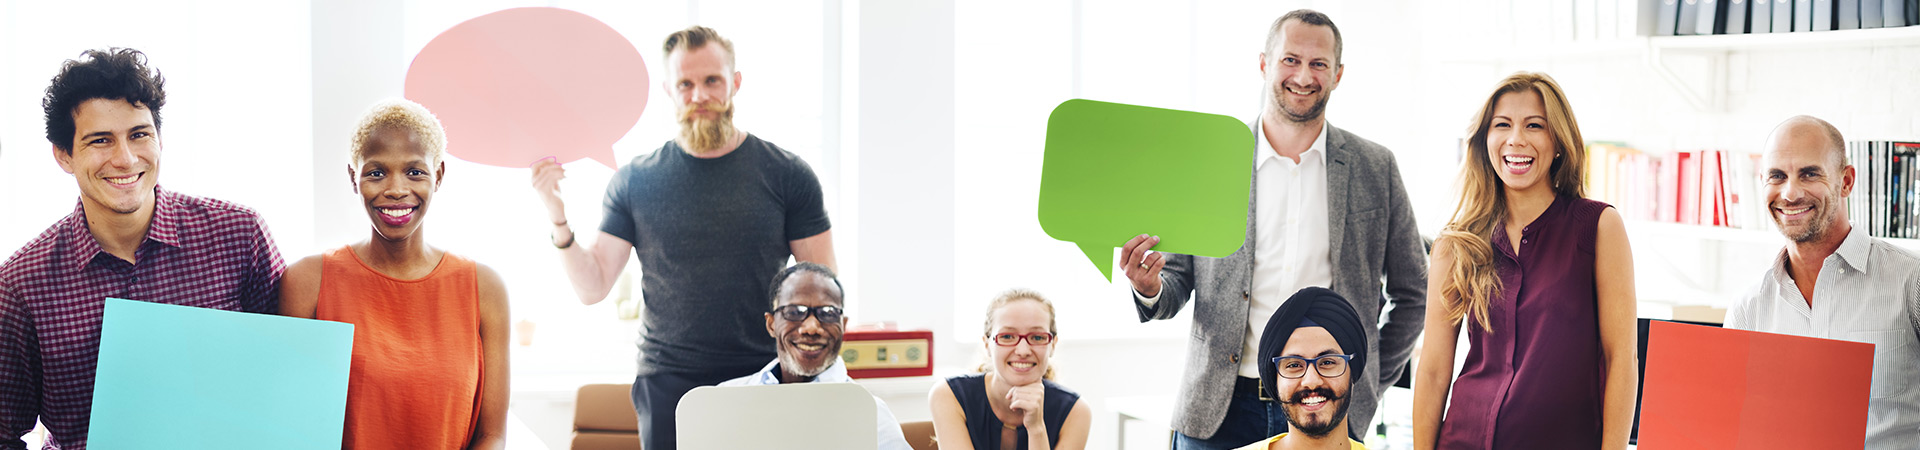 Group of diverse office workers holding up speech bubbles